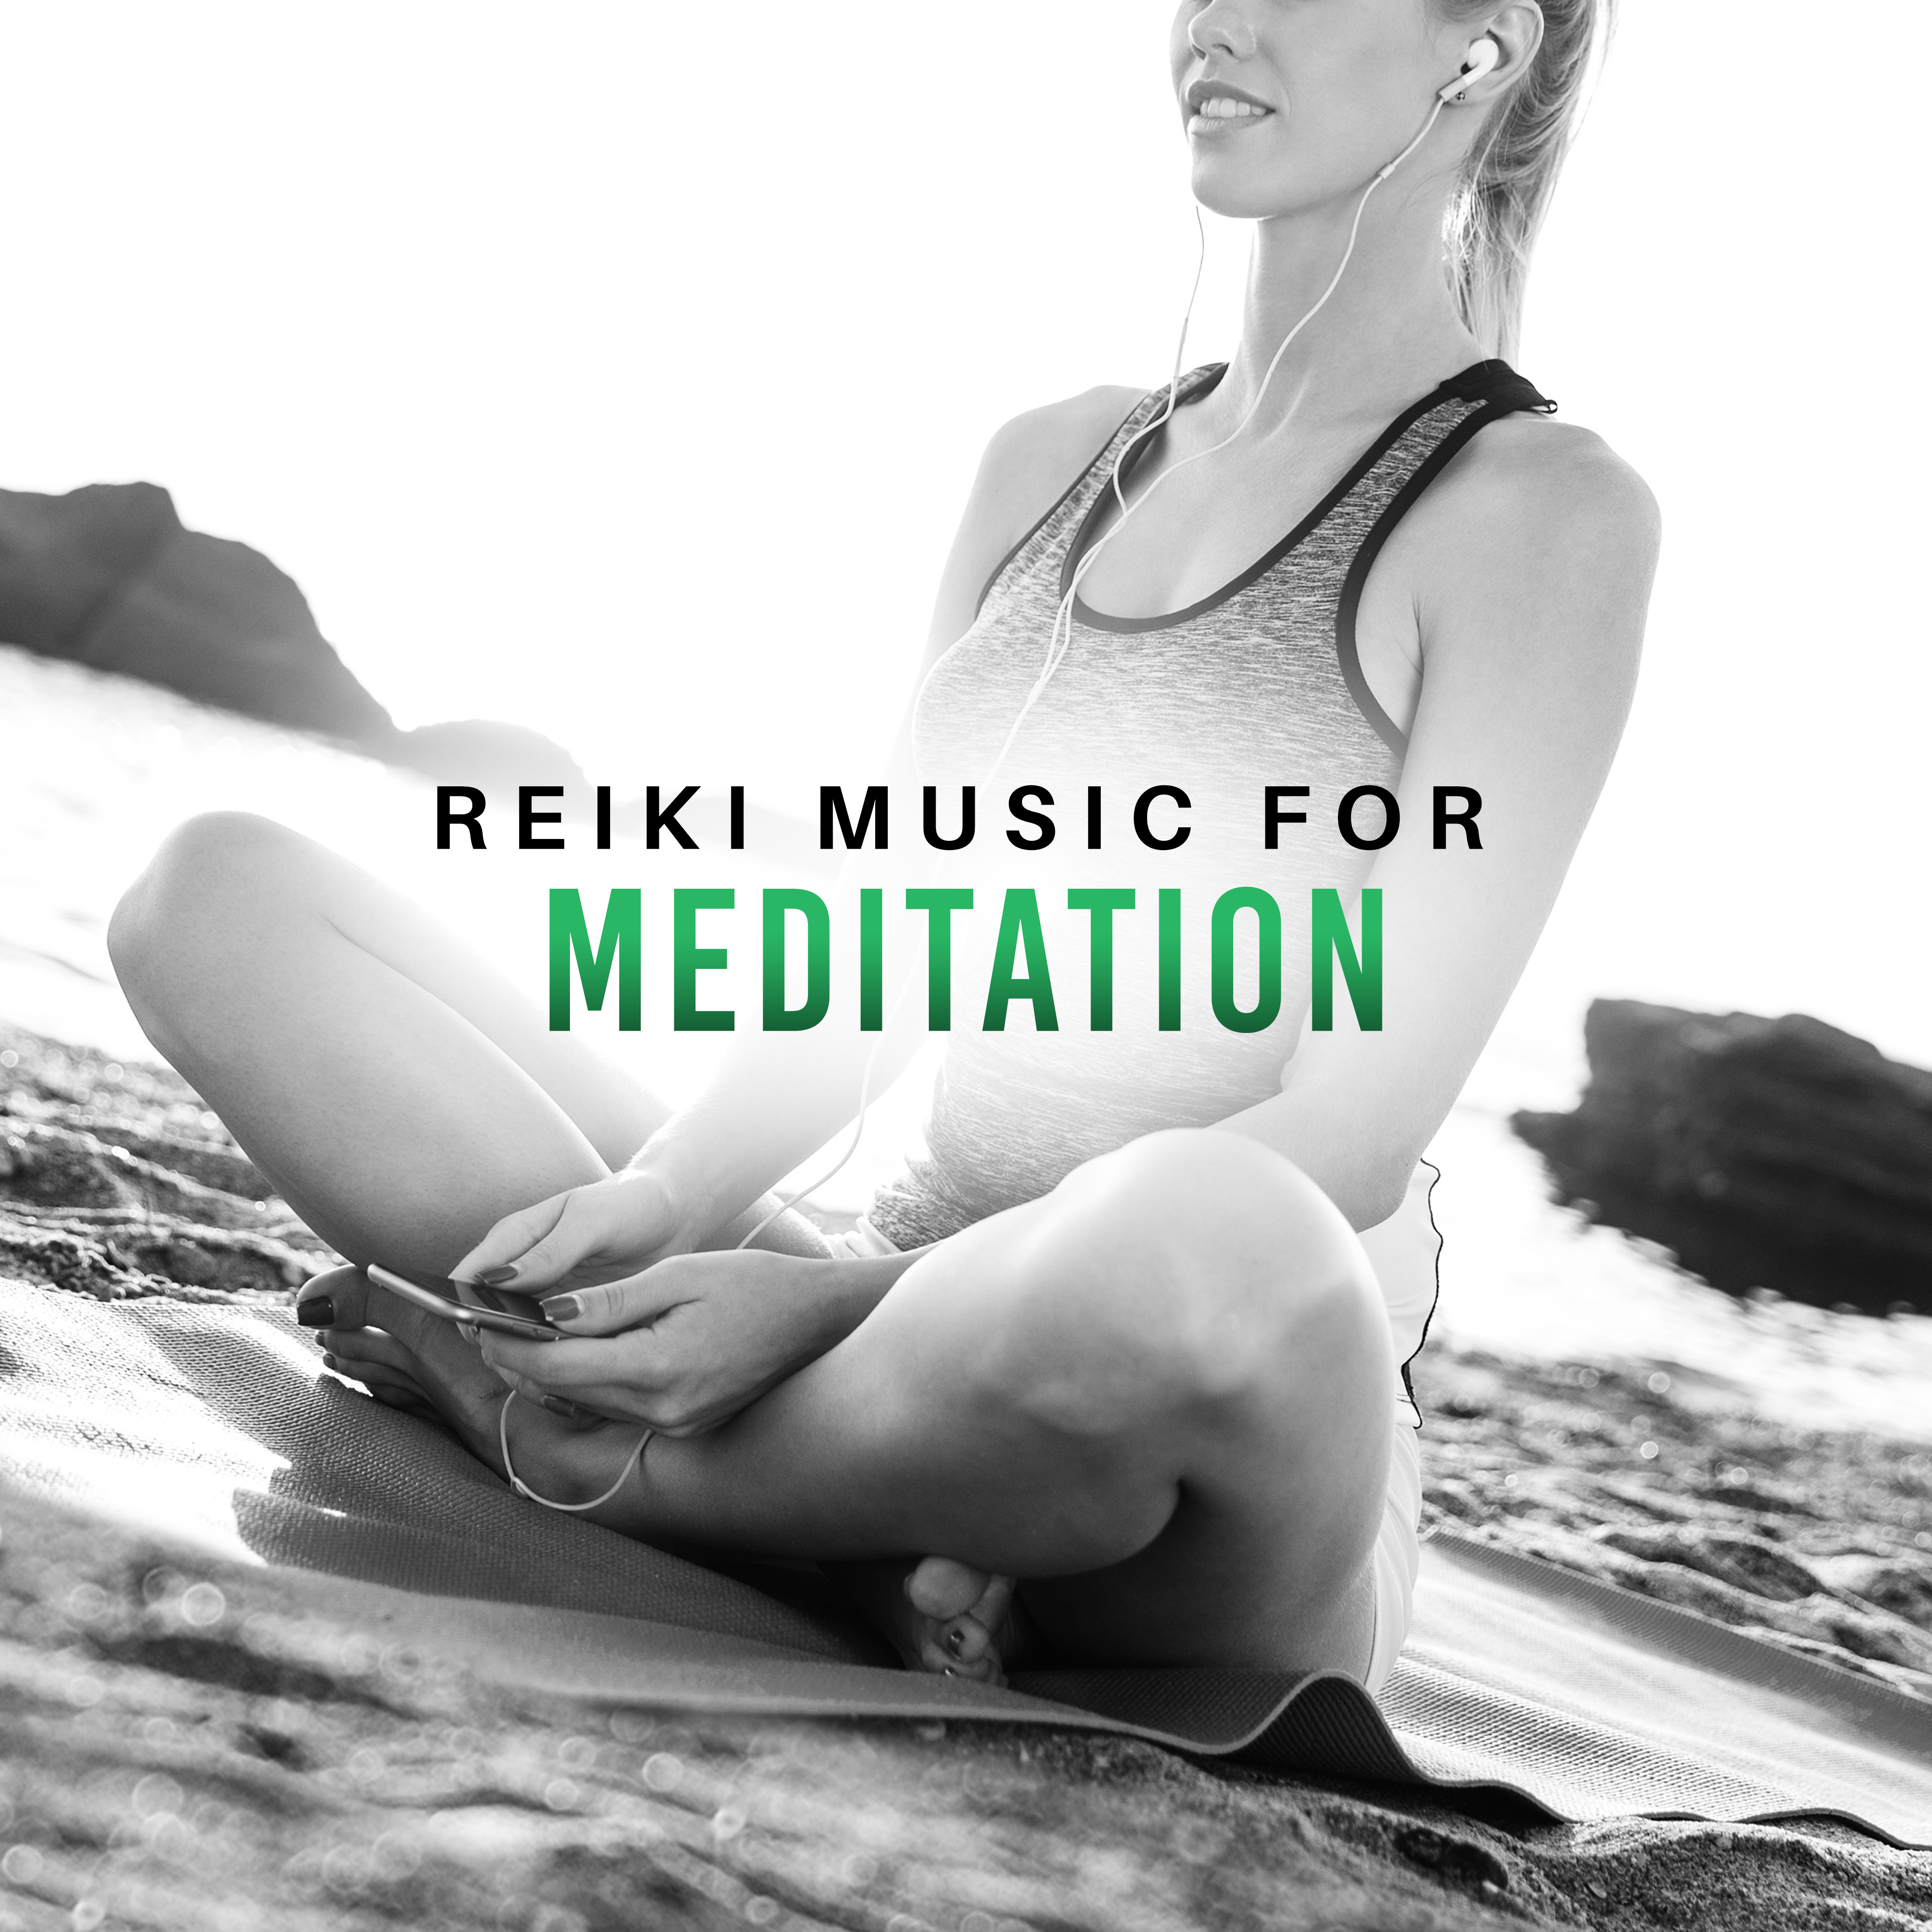 Reiki Music for Meditation – Hatha Yoga, Deep Concentration, Peaceful Mind, Pure Relaxation, Meditate